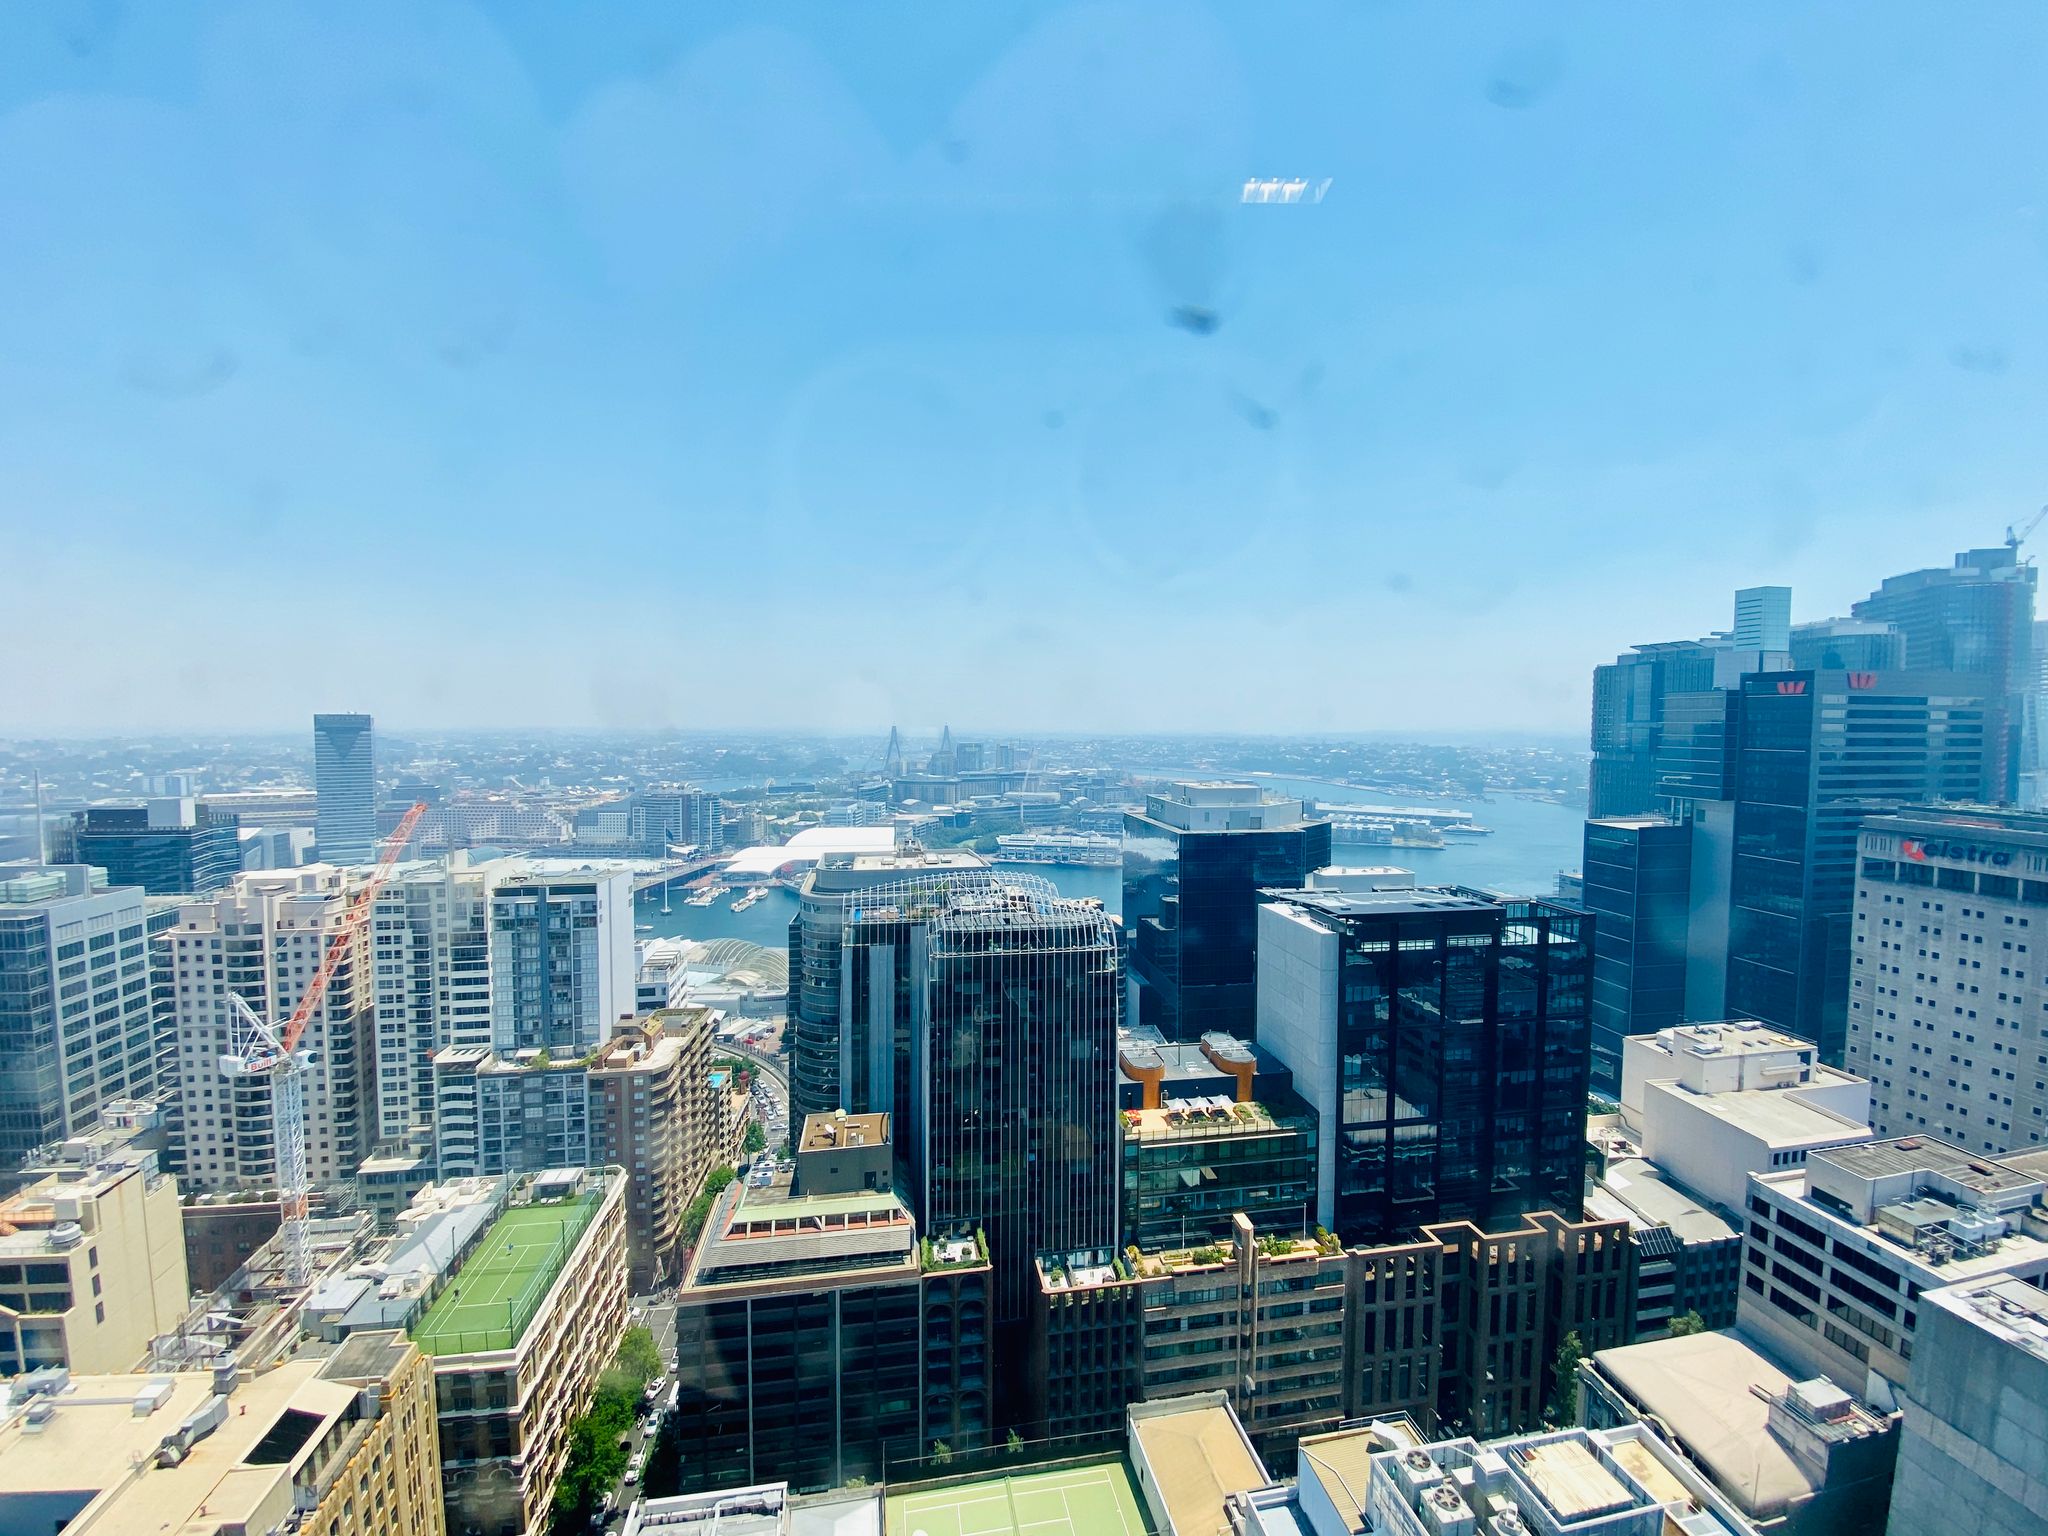 A view from the 29th floor of a building looking out towards the west of Sydney. Some tall buildings are at the right, and smoke haze covers the whole scene.